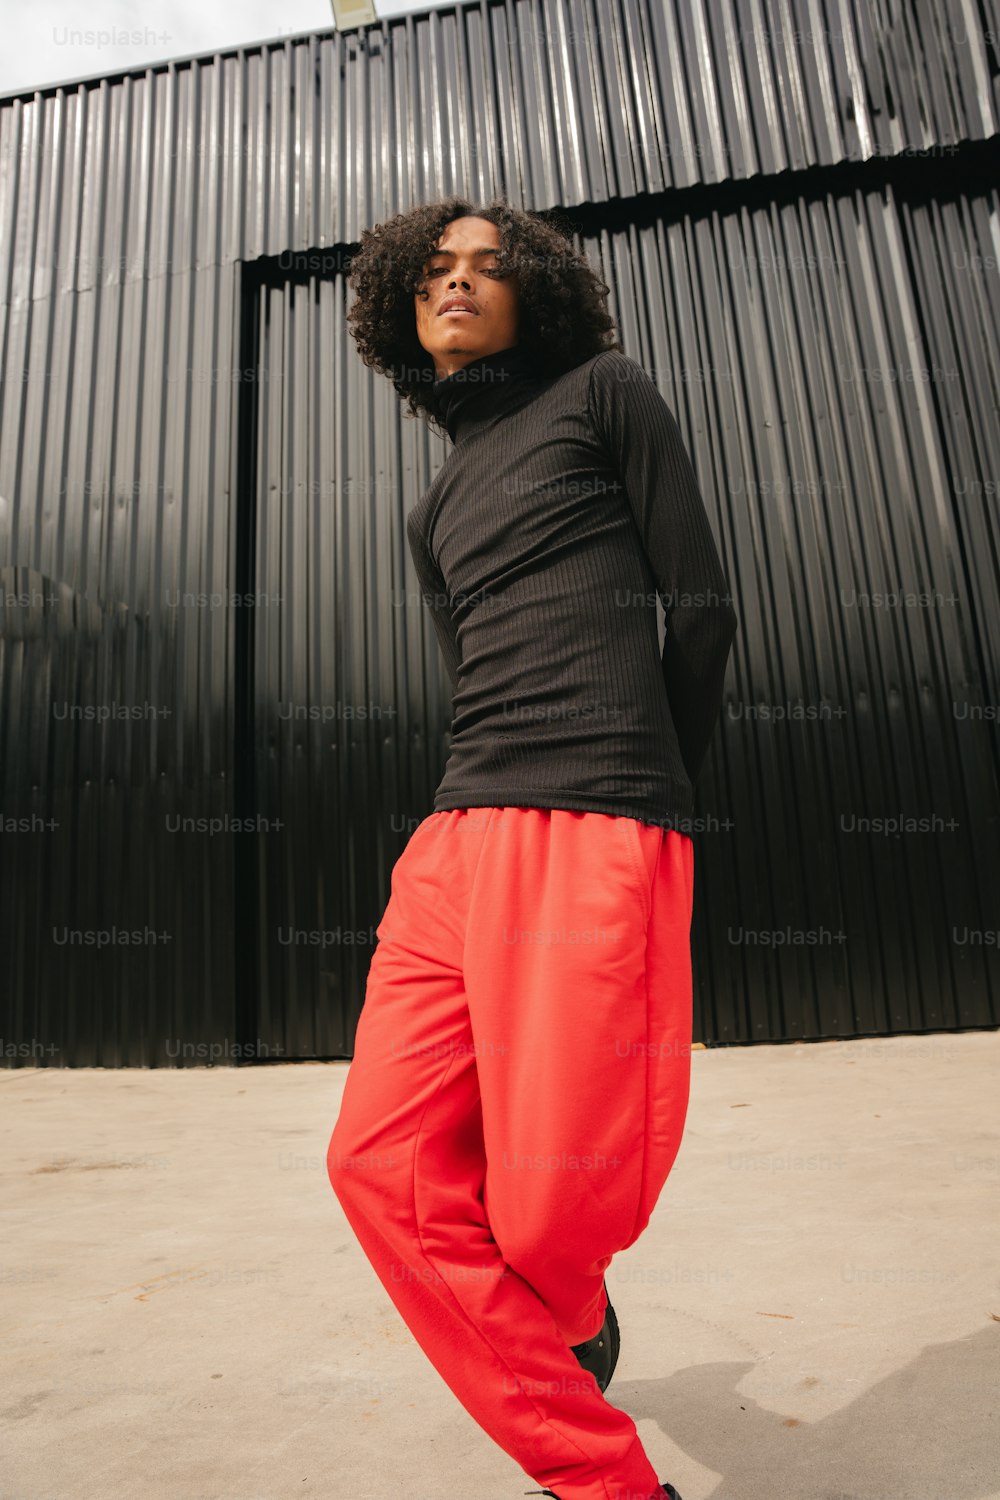 a woman in a black top and red pants